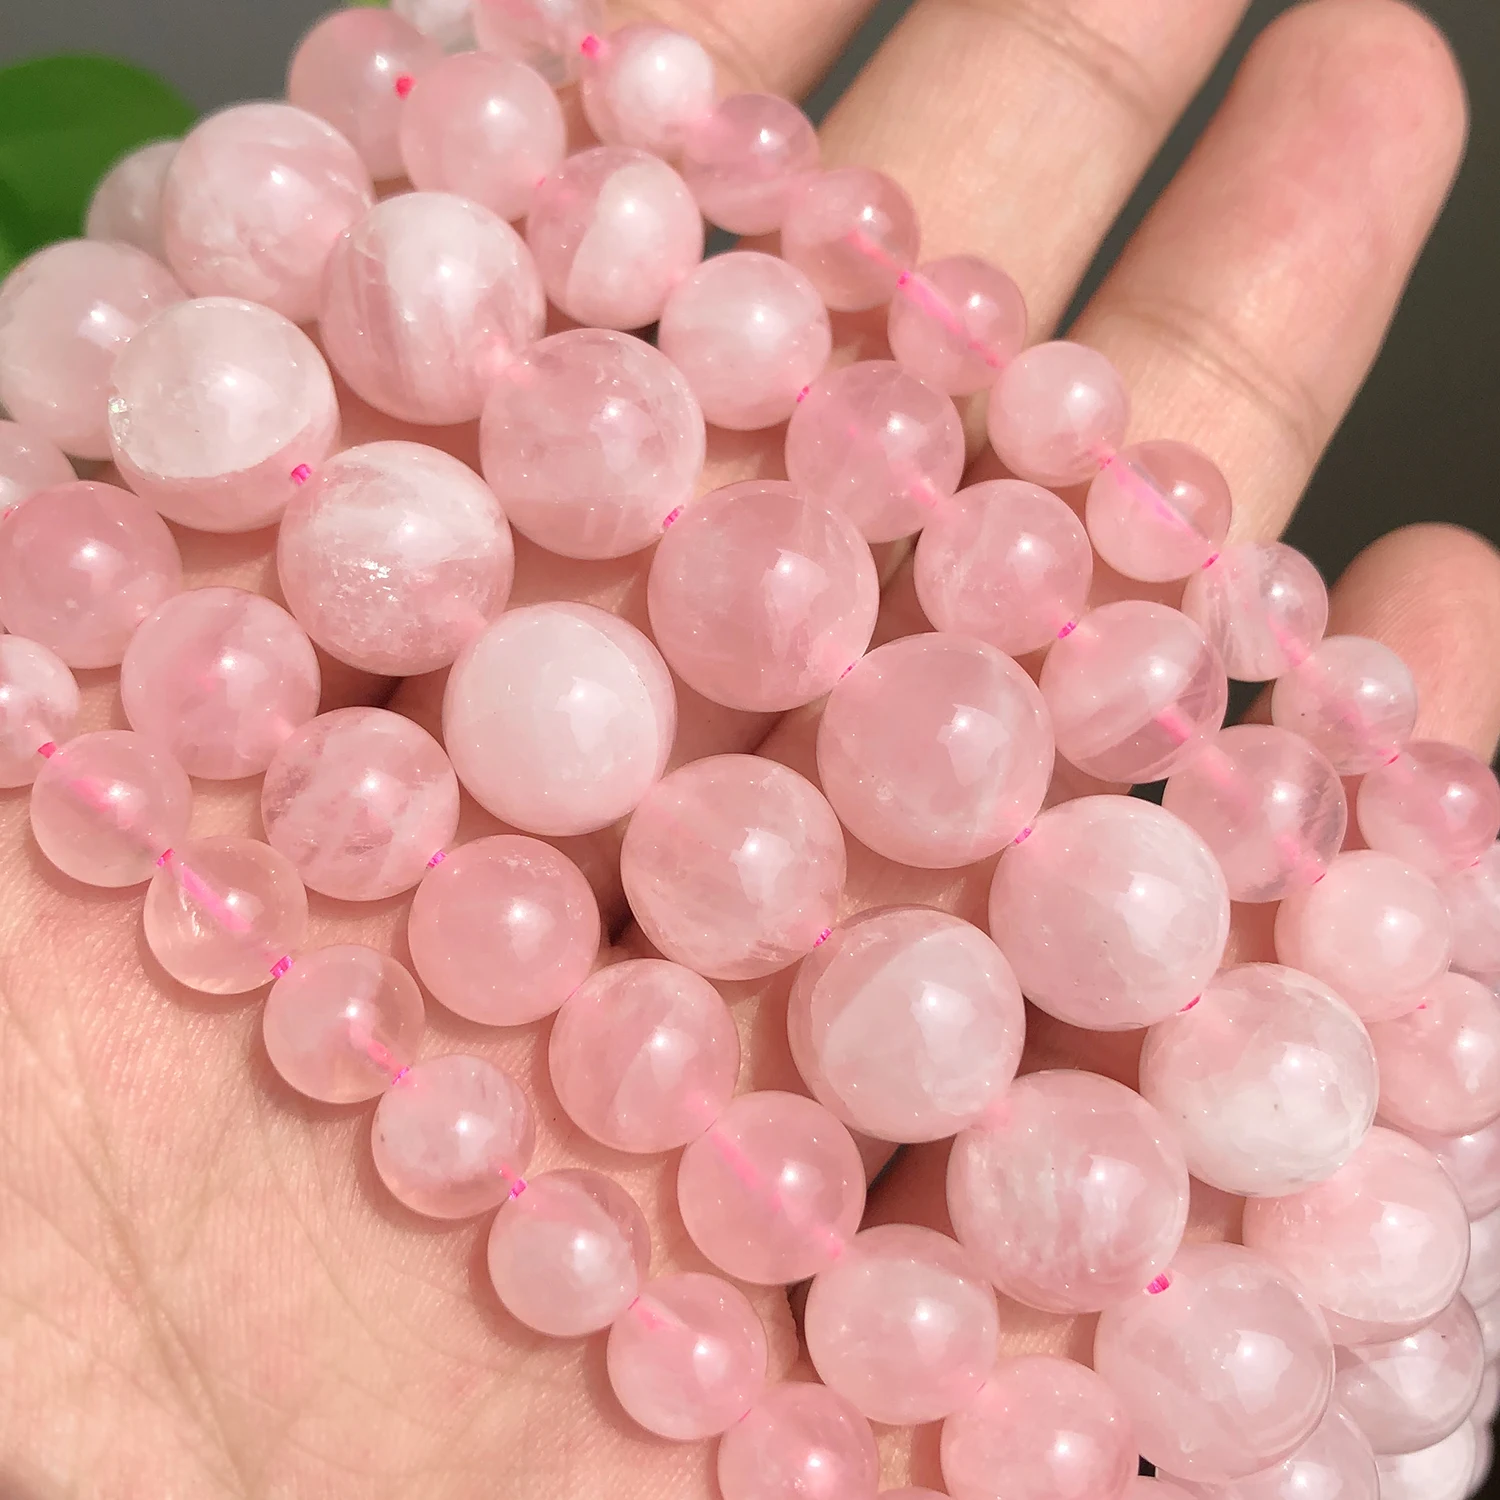 Rose Quartz Natural Faceted Gemstone Loose Round Crystal Wholesale DIY Jewelry 